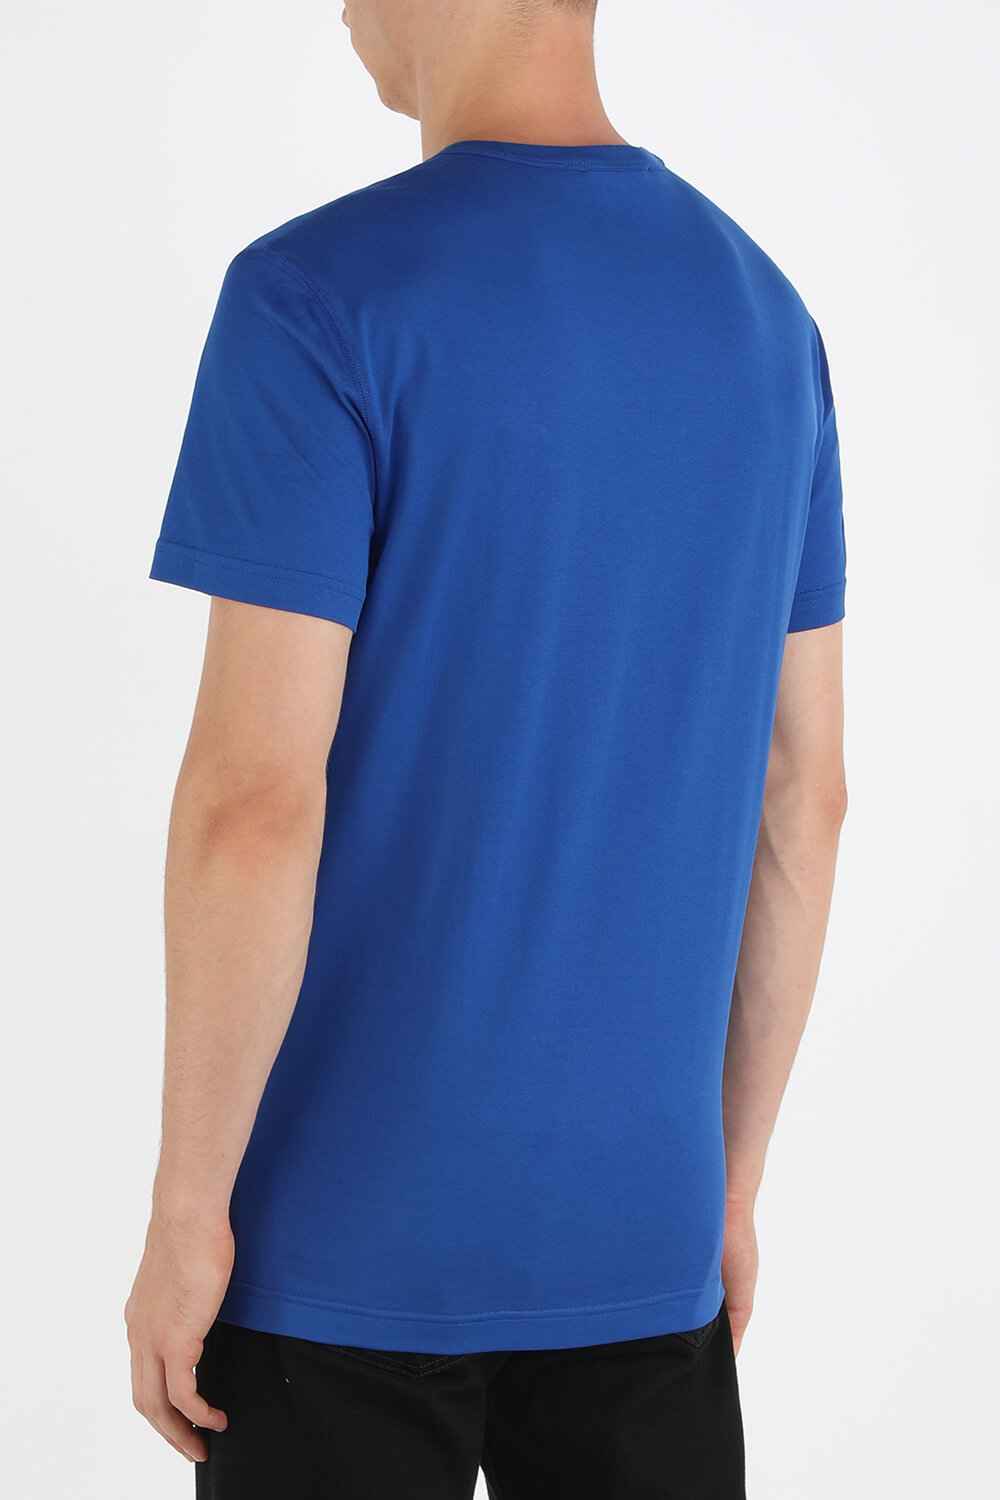 T-Shirt With With Branded Plate in Blue DOLCE & GABBANA